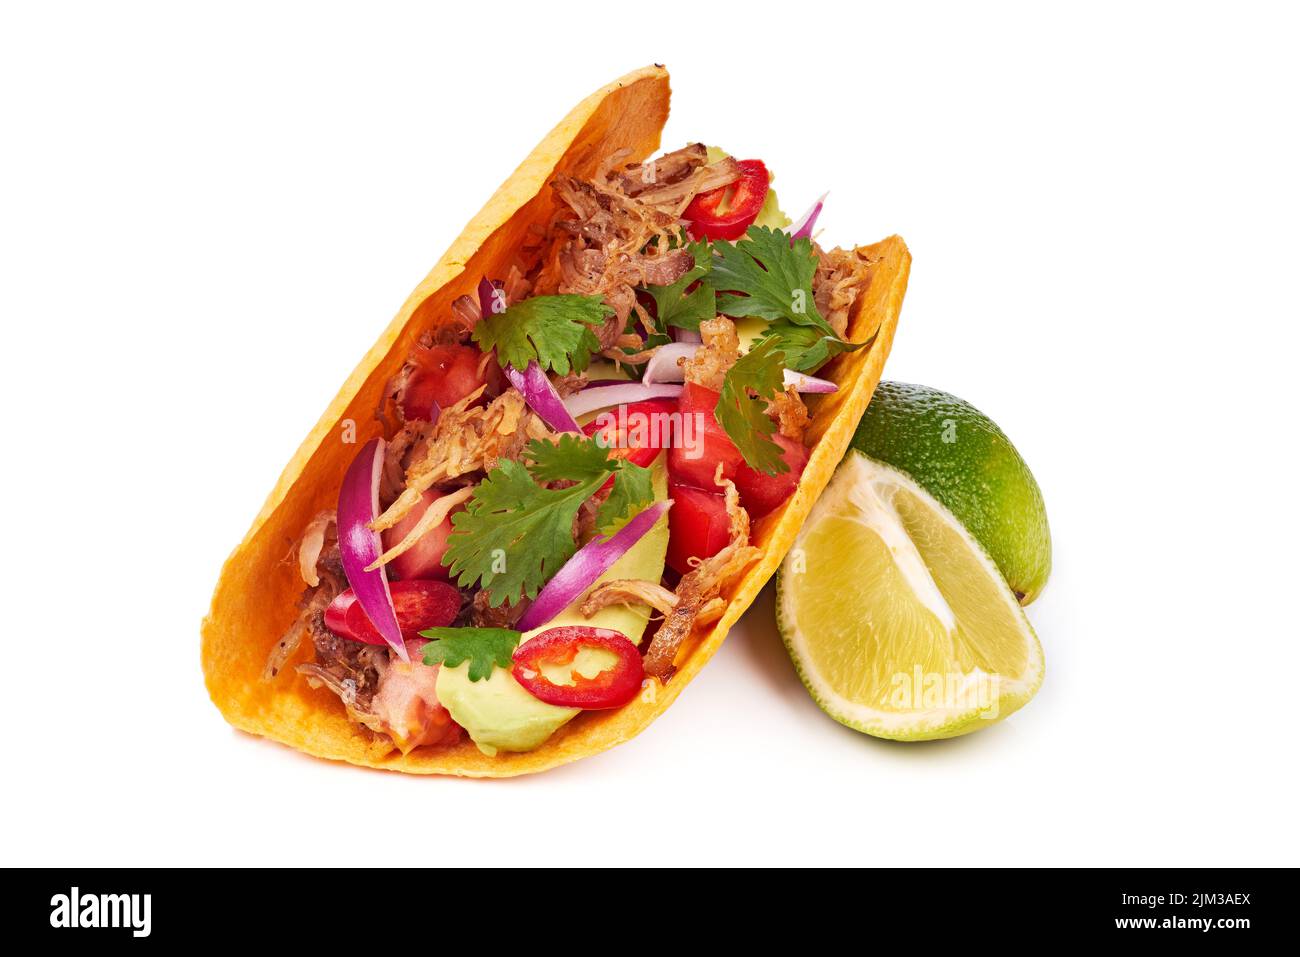 Pulled pork taco with lime on white background Stock Photo